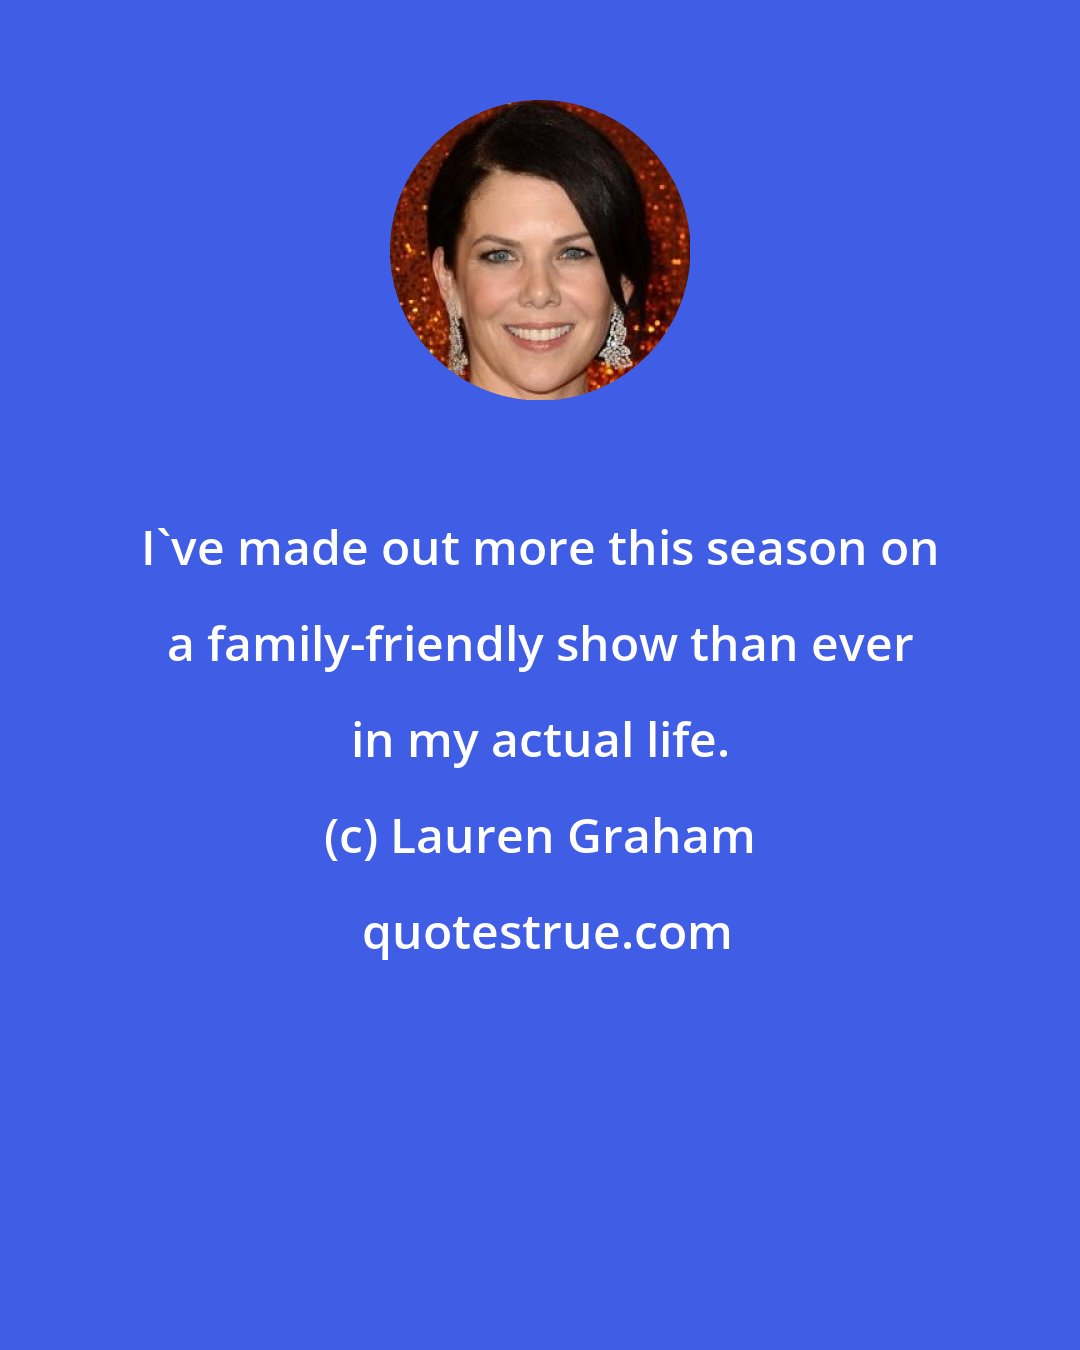 Lauren Graham: I've made out more this season on a family-friendly show than ever in my actual life.